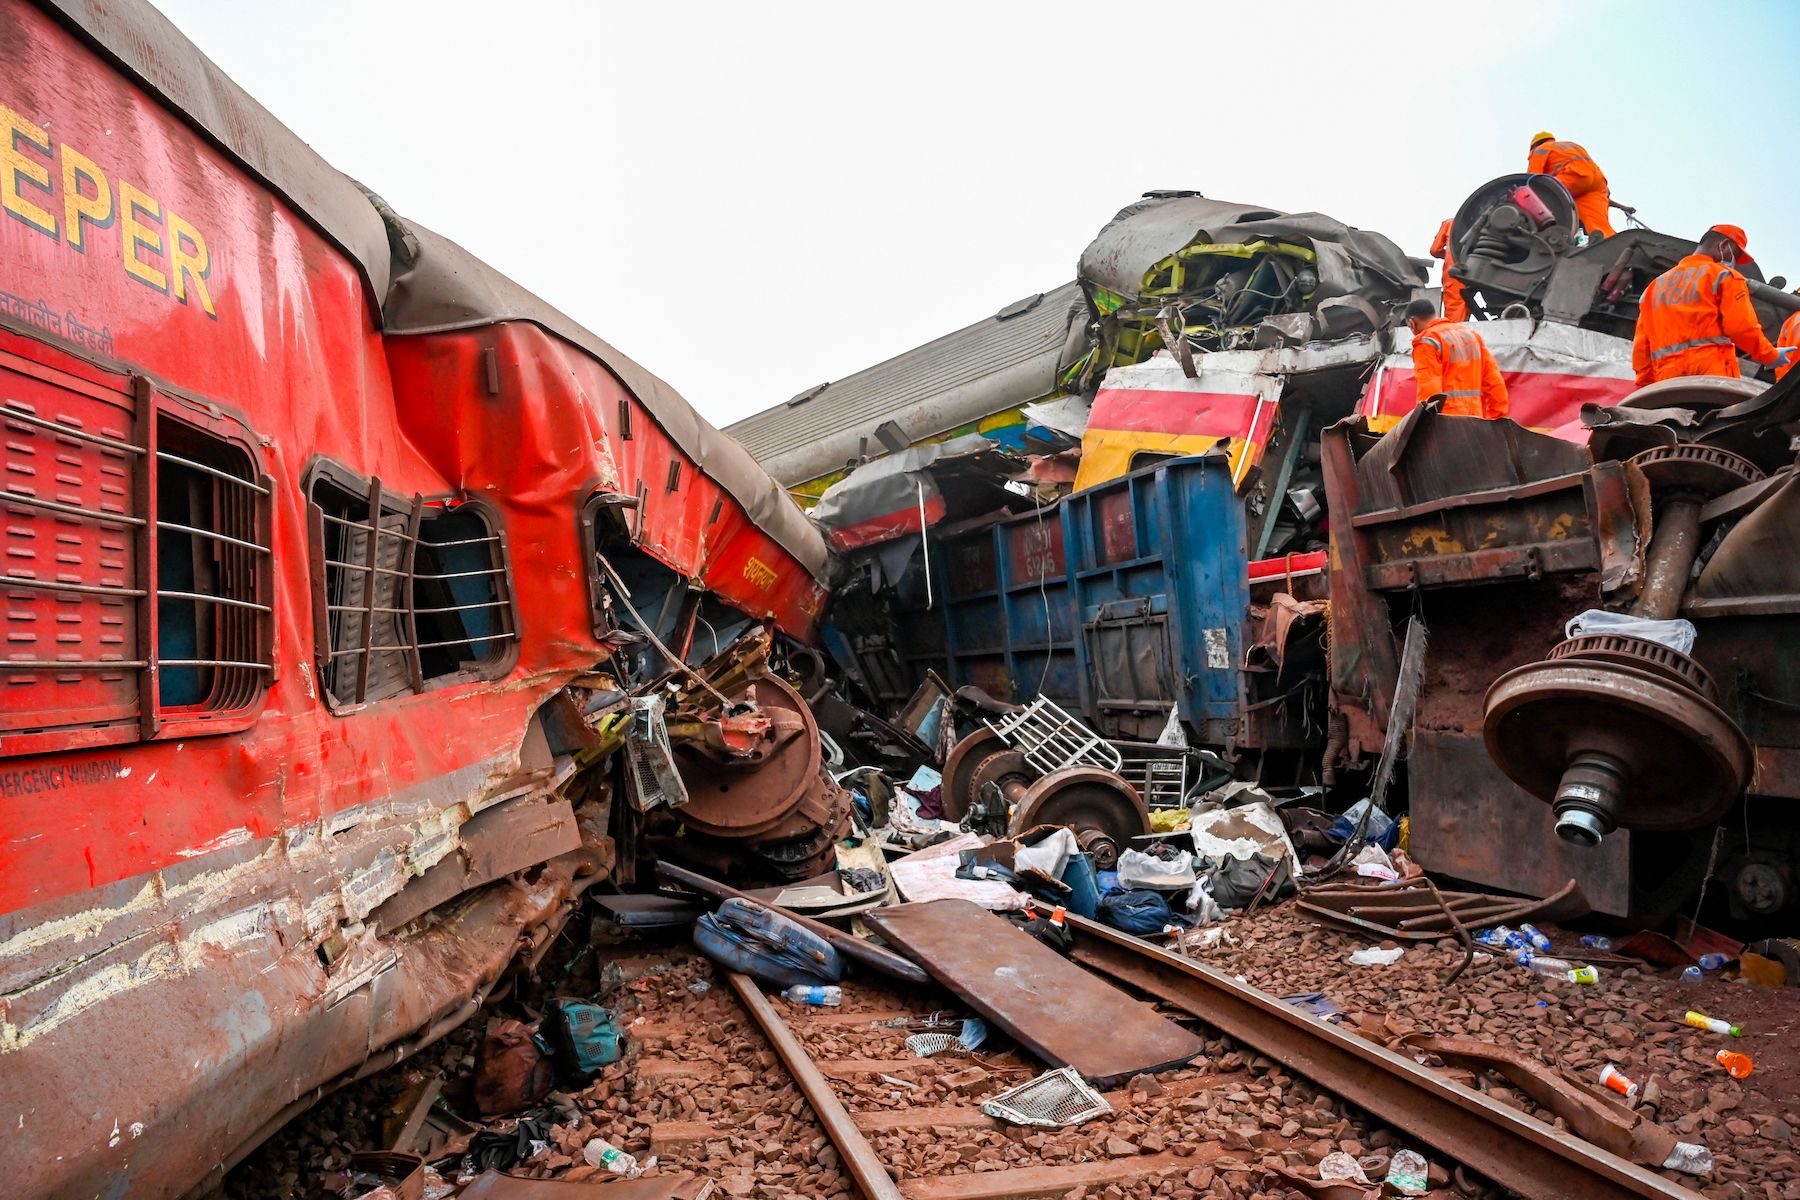 Three Trains Collided In India And At Least 295 People Are Dead And 1,175 Injured